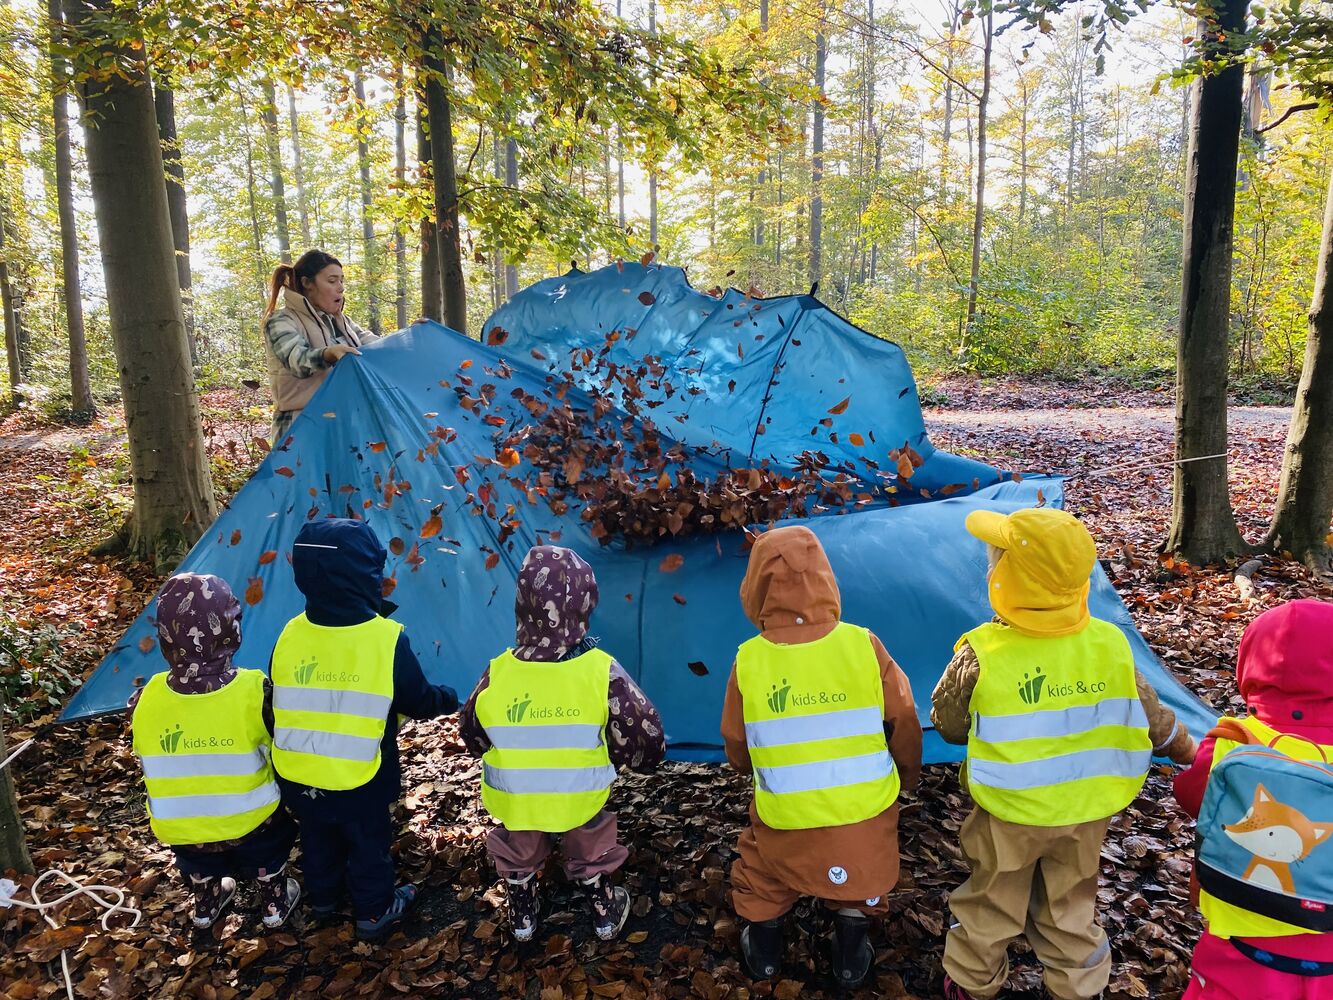 Daycare kids & co Europaallee forest day